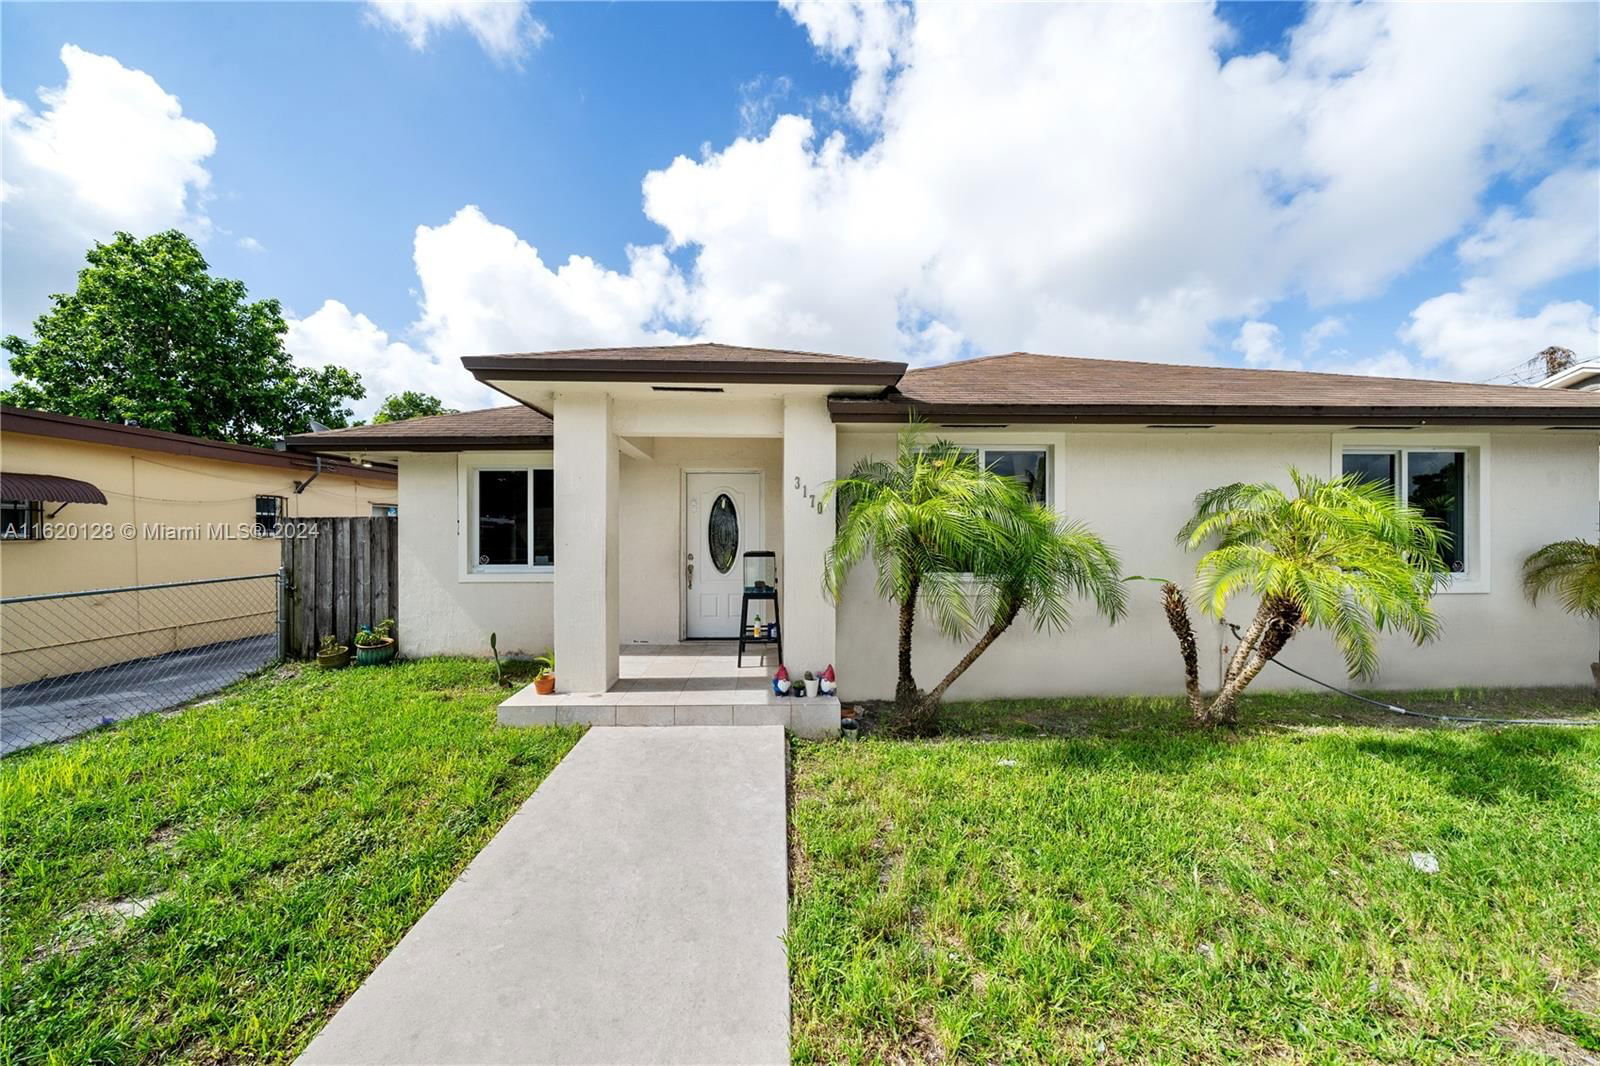 Real estate property located at 3170 92nd St, Miami-Dade County, THE TROPICS AMD, Miami, FL